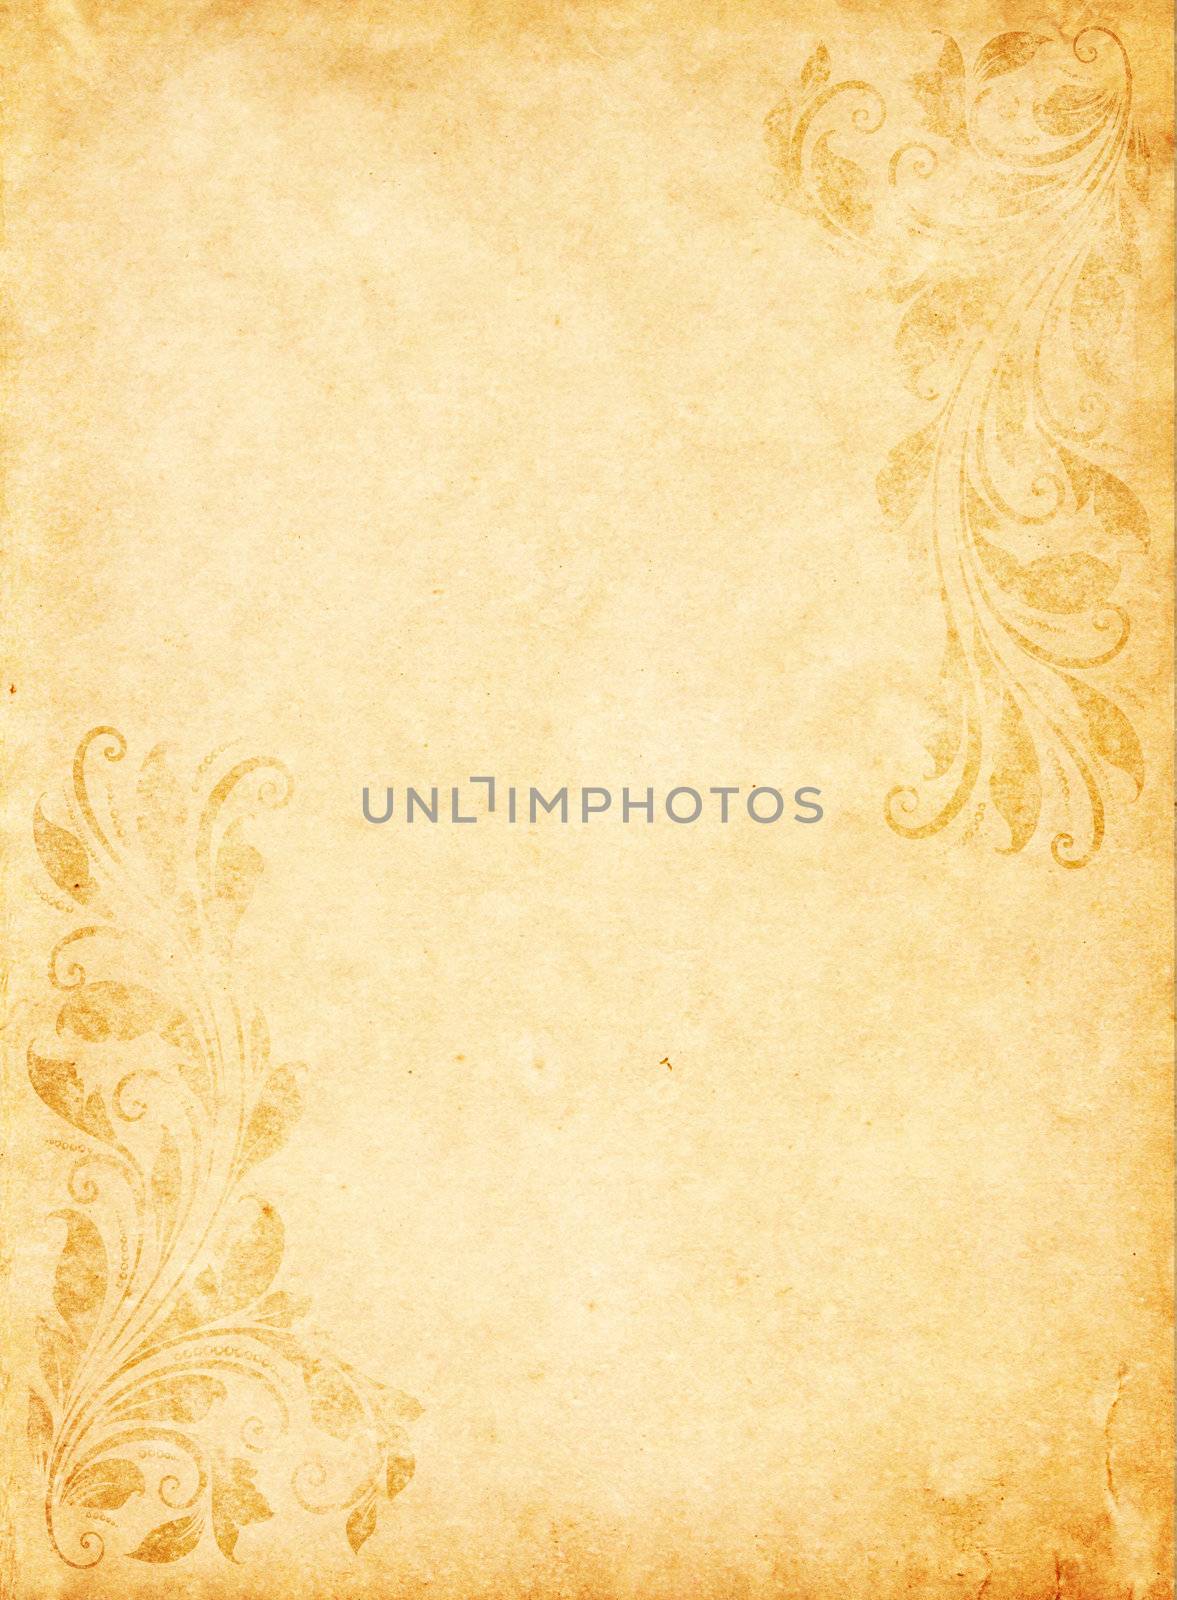 old grunge paper background with vintage victorian style by nuchylee